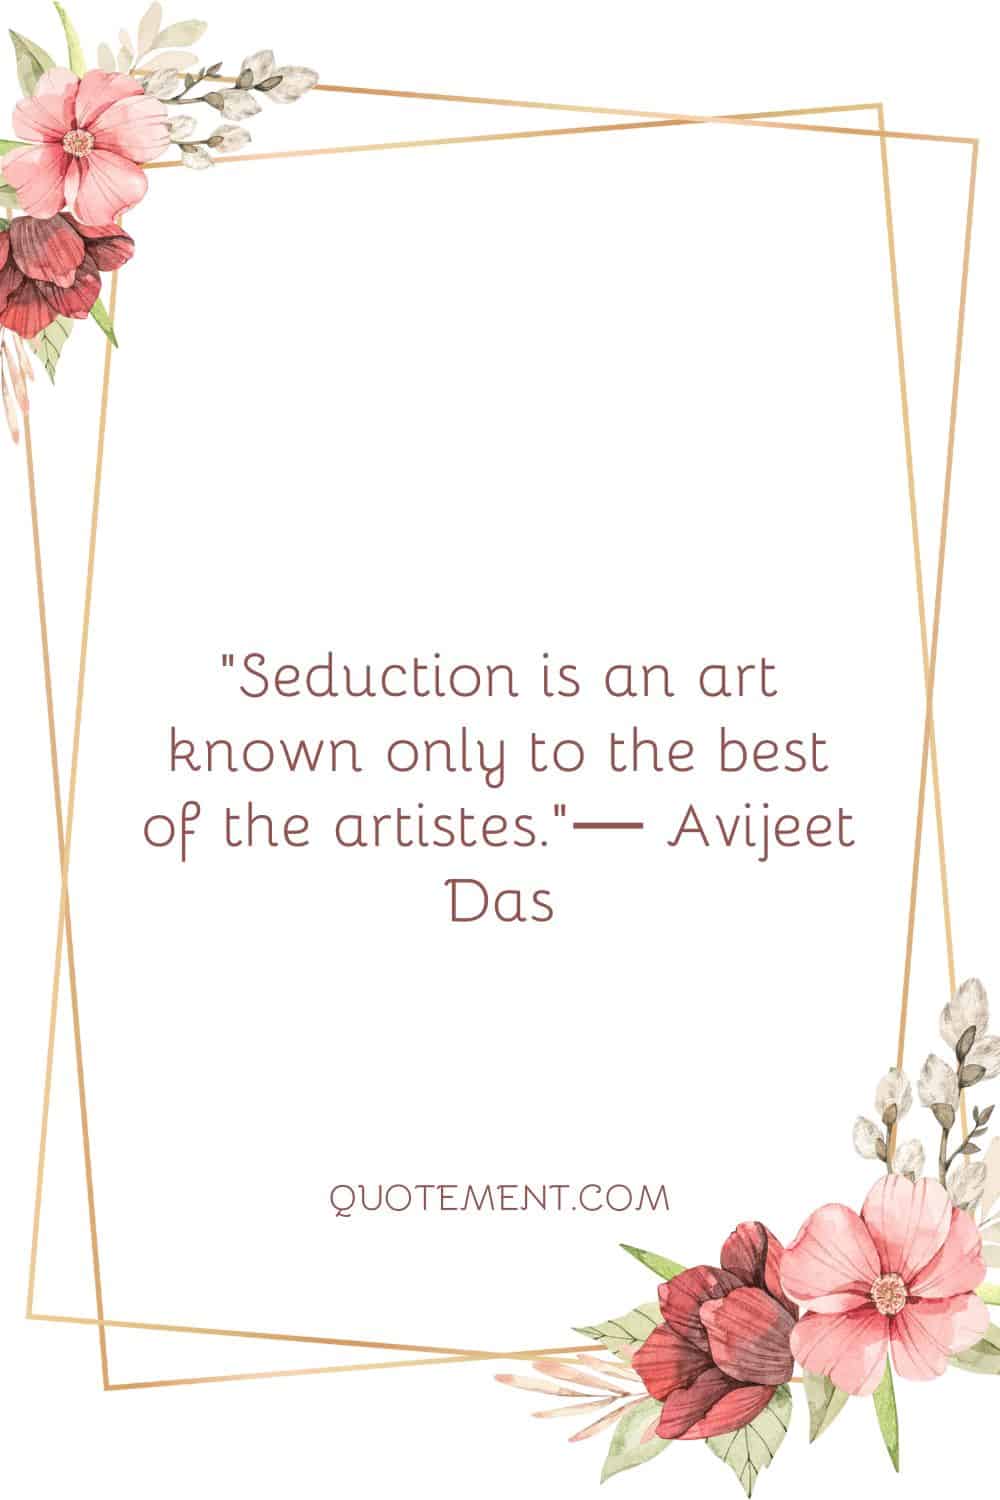 Seduction is an art known only to the best of the artistes